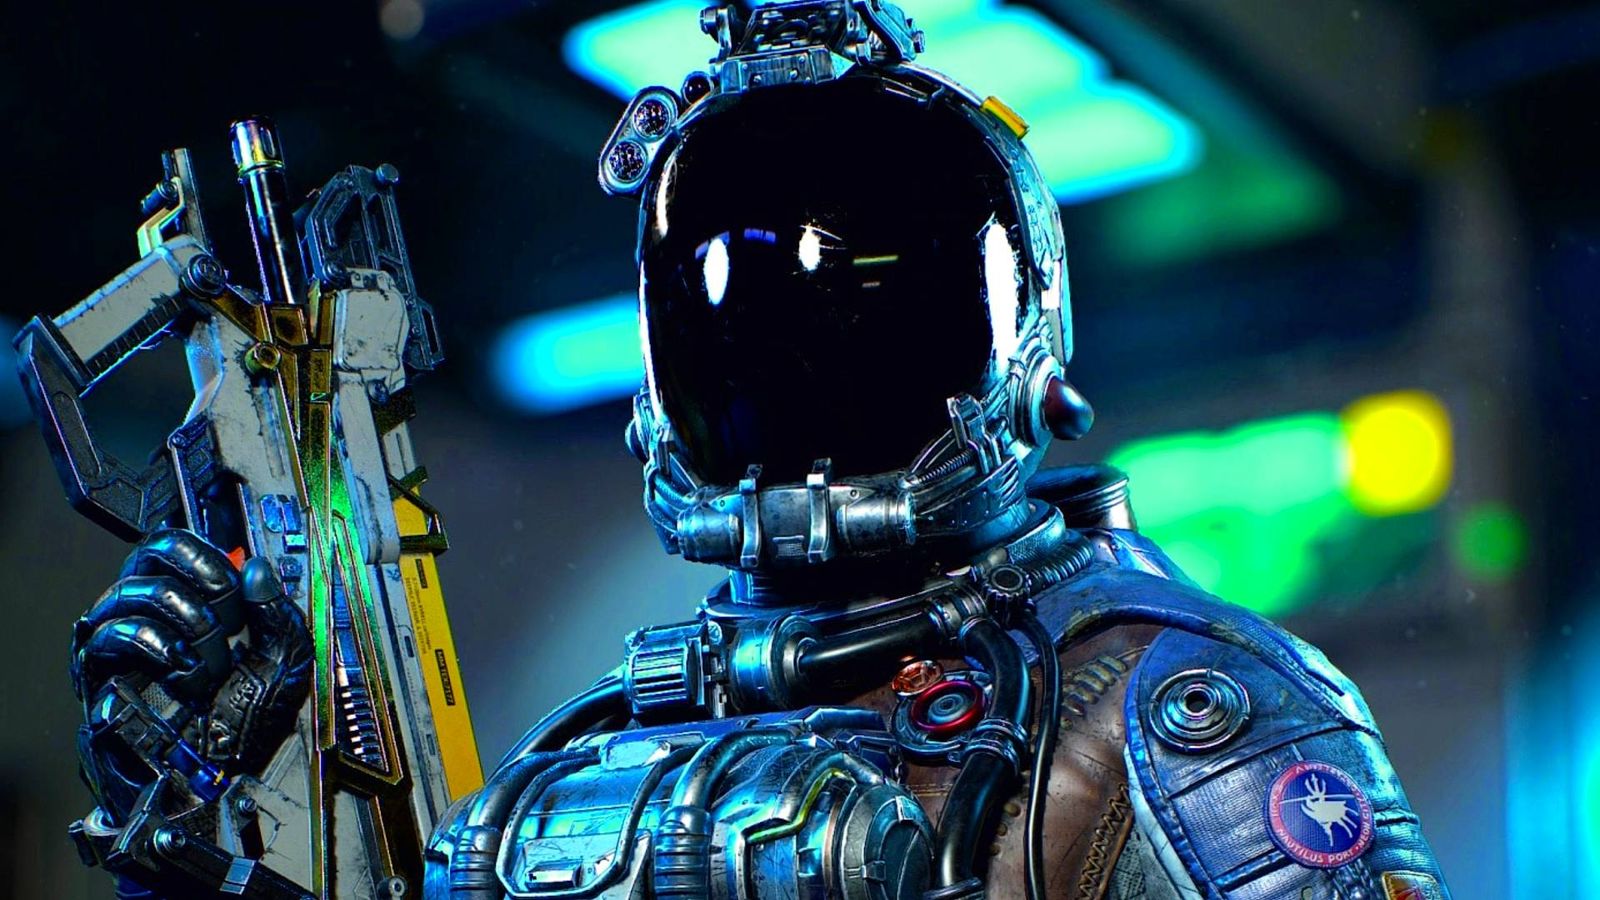 Starfield preload date - space suit with guns